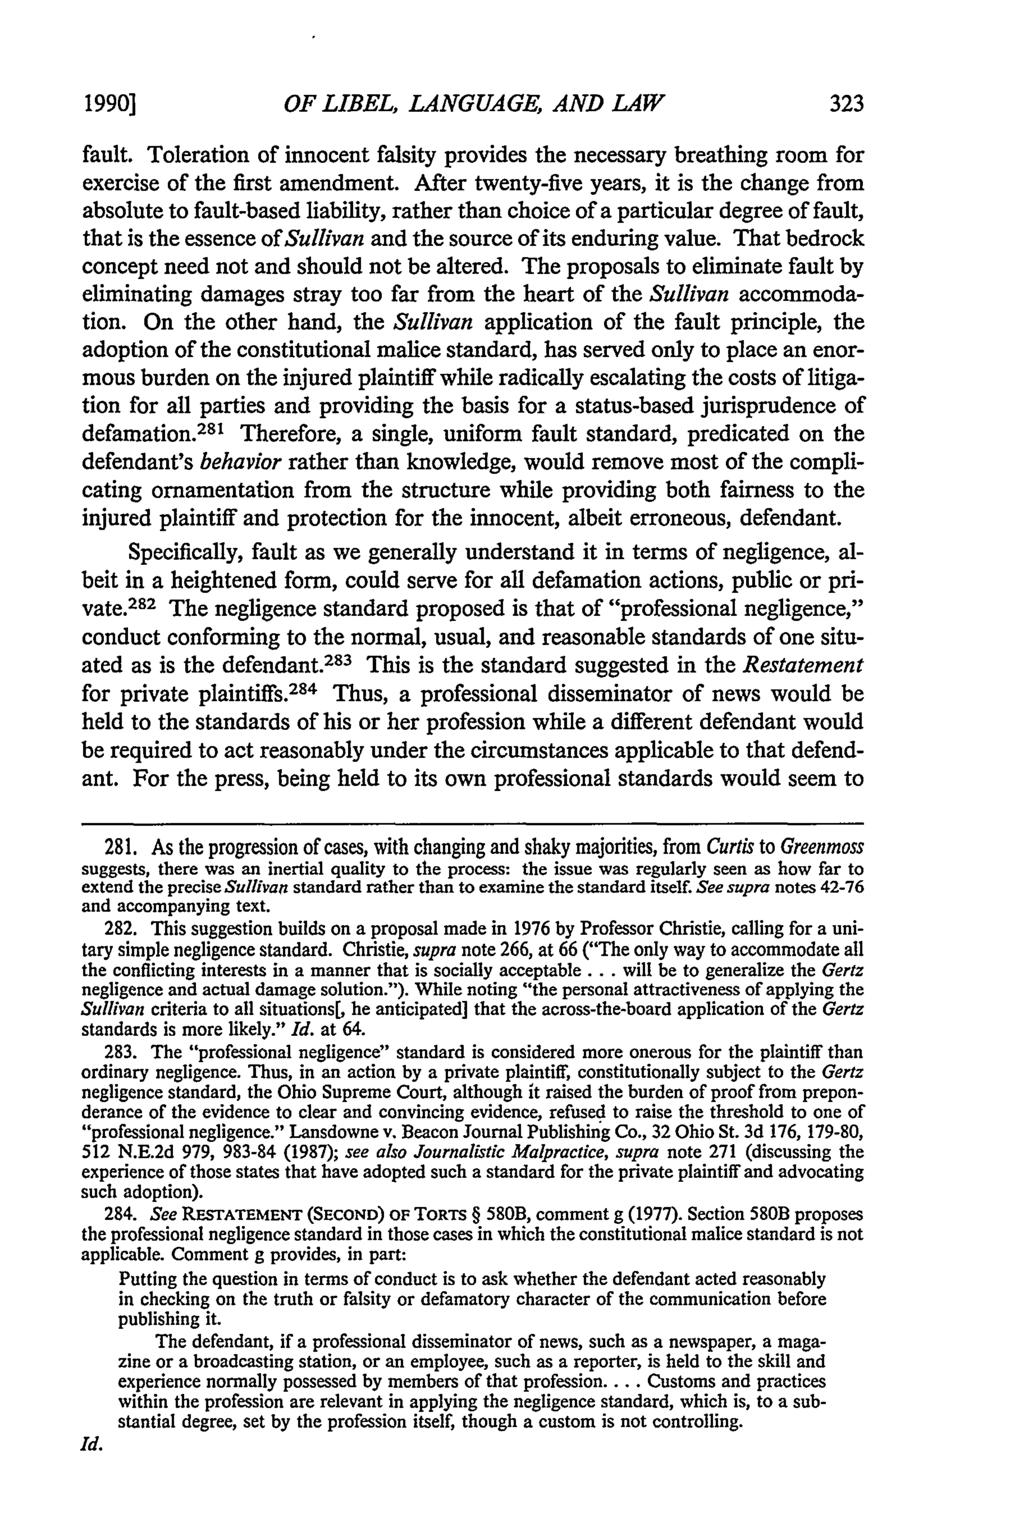 1990] OF LIBEL, LANGUAGE, AND LAW fault. Toleration of innocent falsity provides the necessary breathing room for exercise of the first amendment.